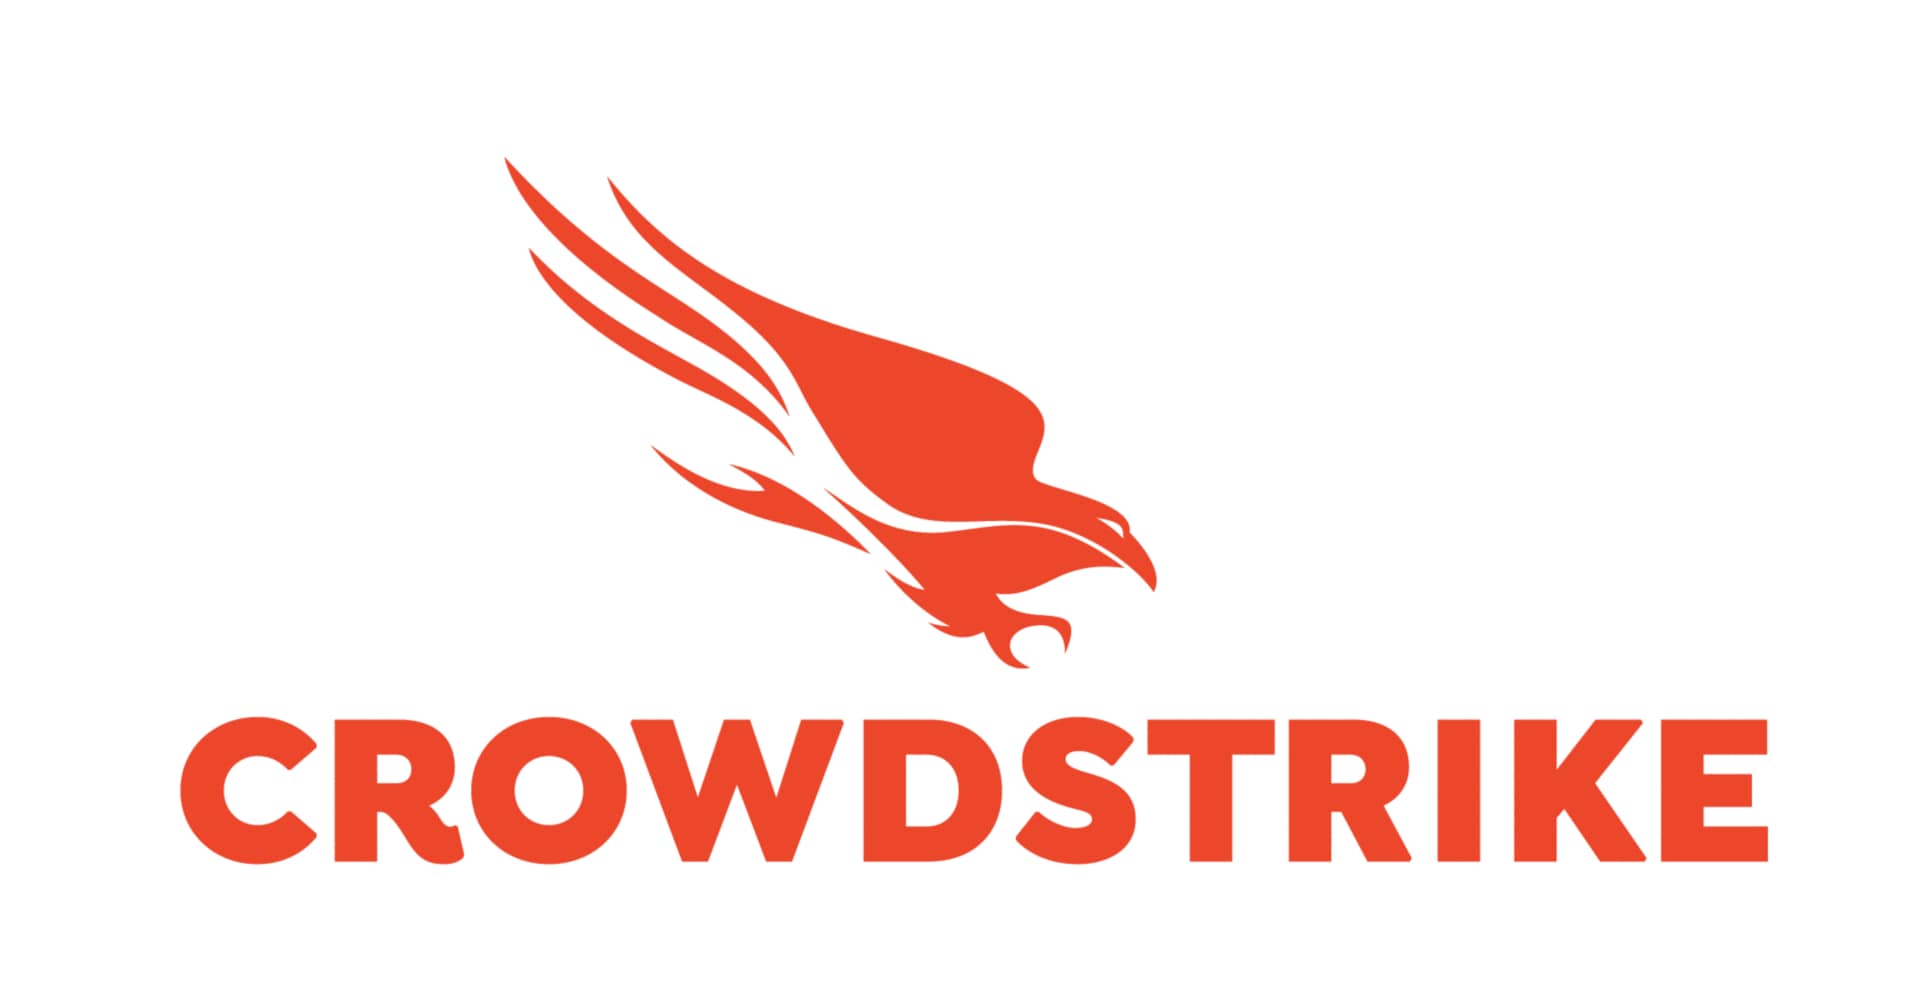 CrowdStrike Threat Graph Standard for Mobile (Requires Falcon for Mobile)